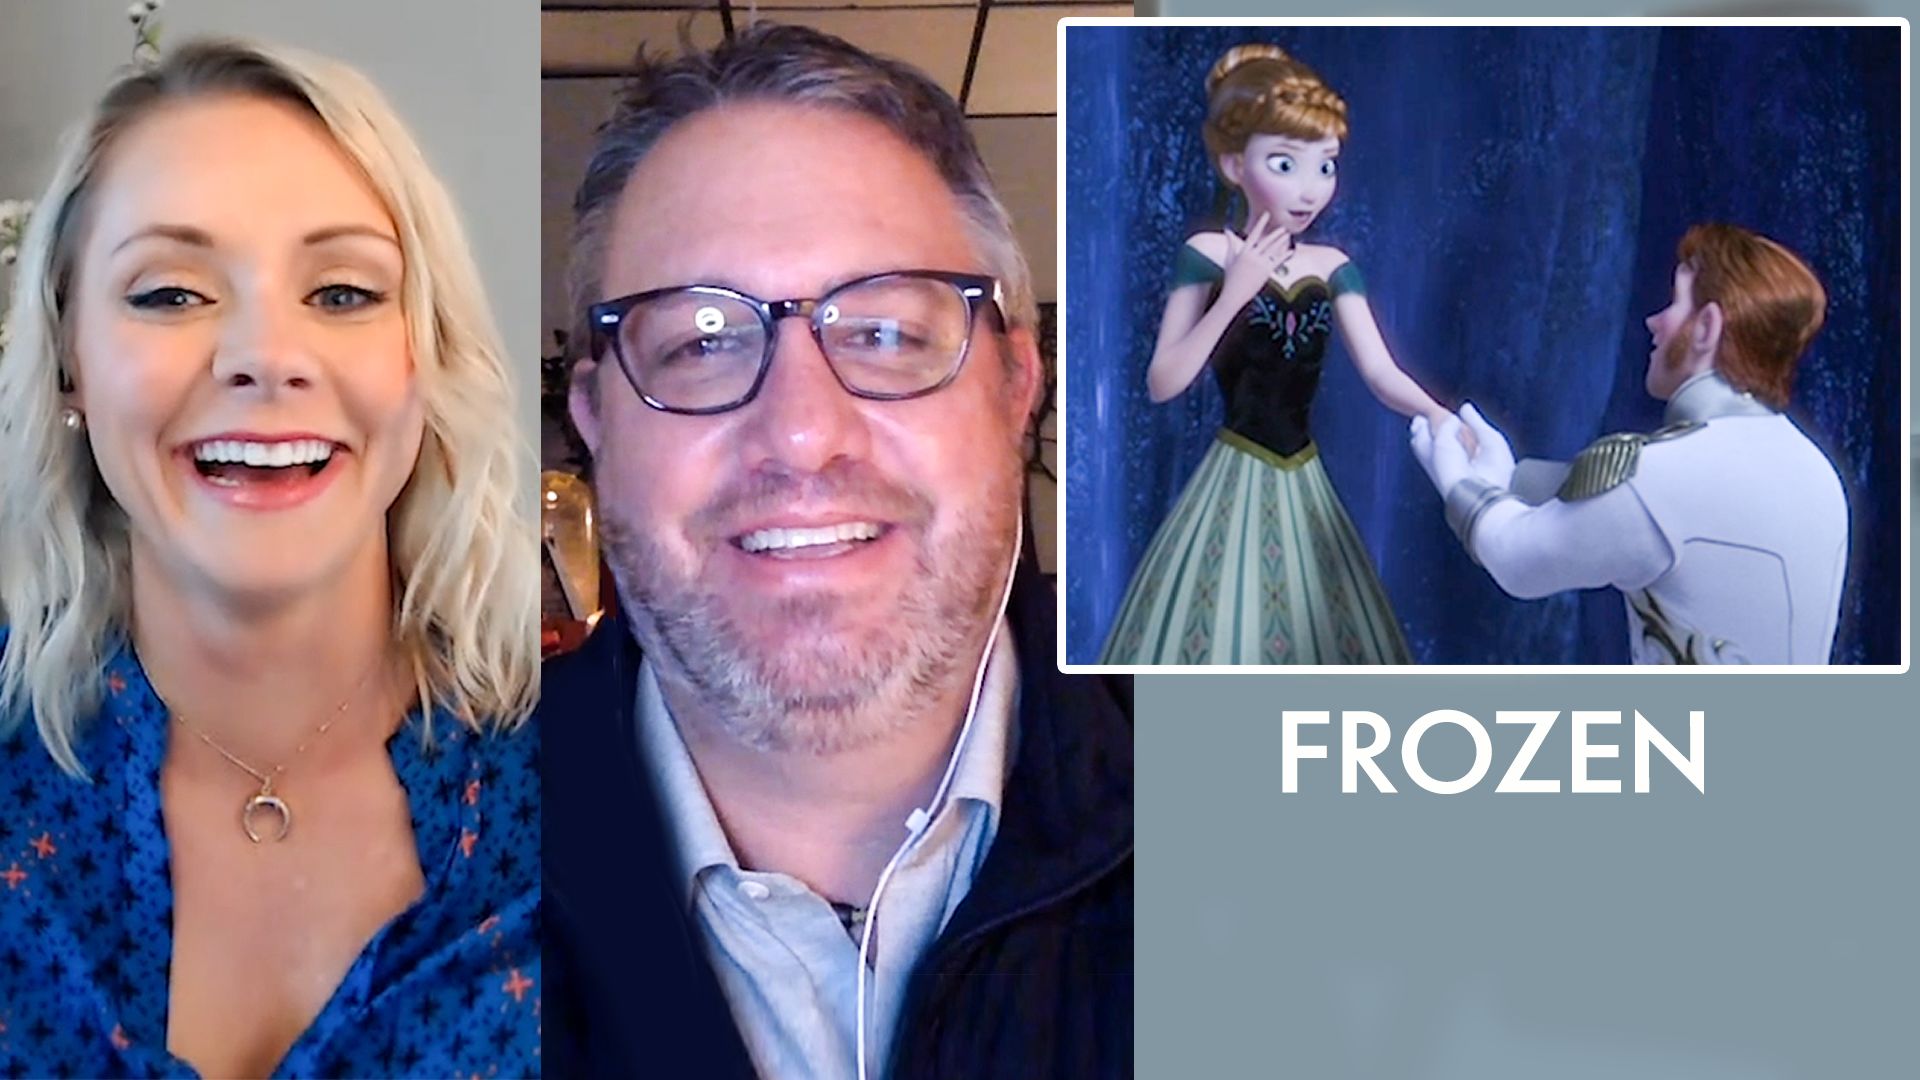 Disney Sleeping Beauty Sex Porn - Watch Therapists Review Disney Relationships, from 'Frozen' to 'The Little  Mermaid' | VF Reviews | Vanity Fair